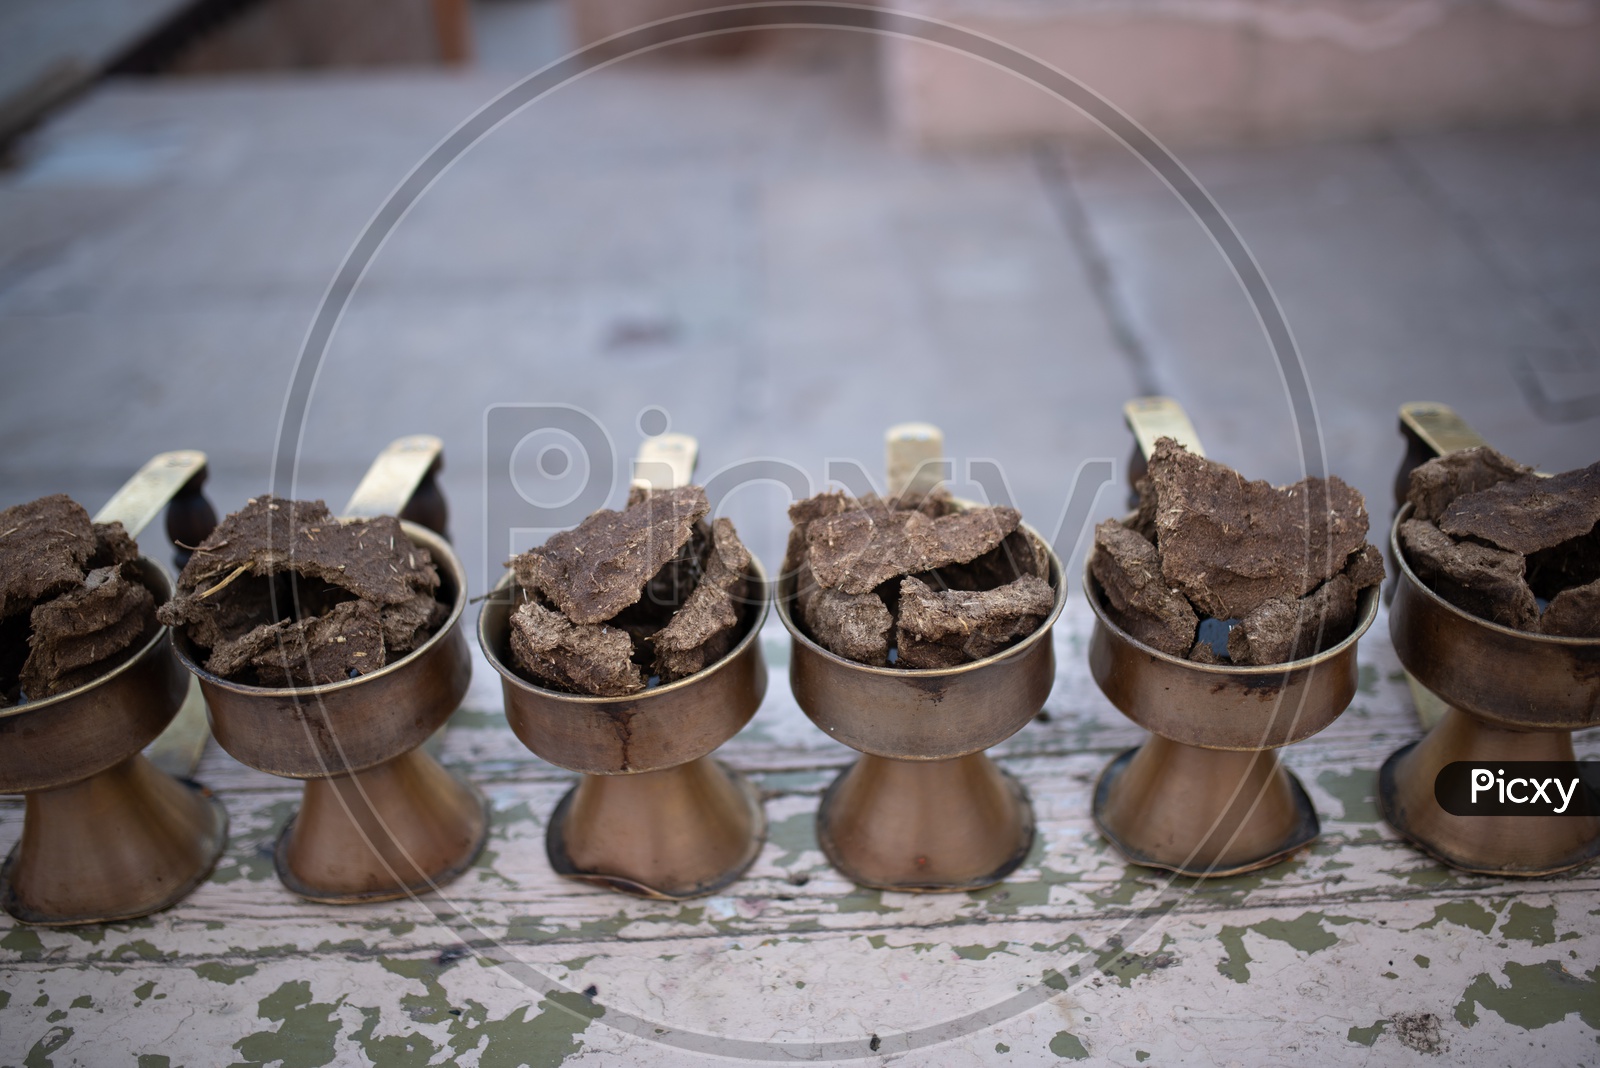 Ganga Aarti  Brass Plates  Filled With Camphor And Dried Cow Dung Cakes  in Varanasi